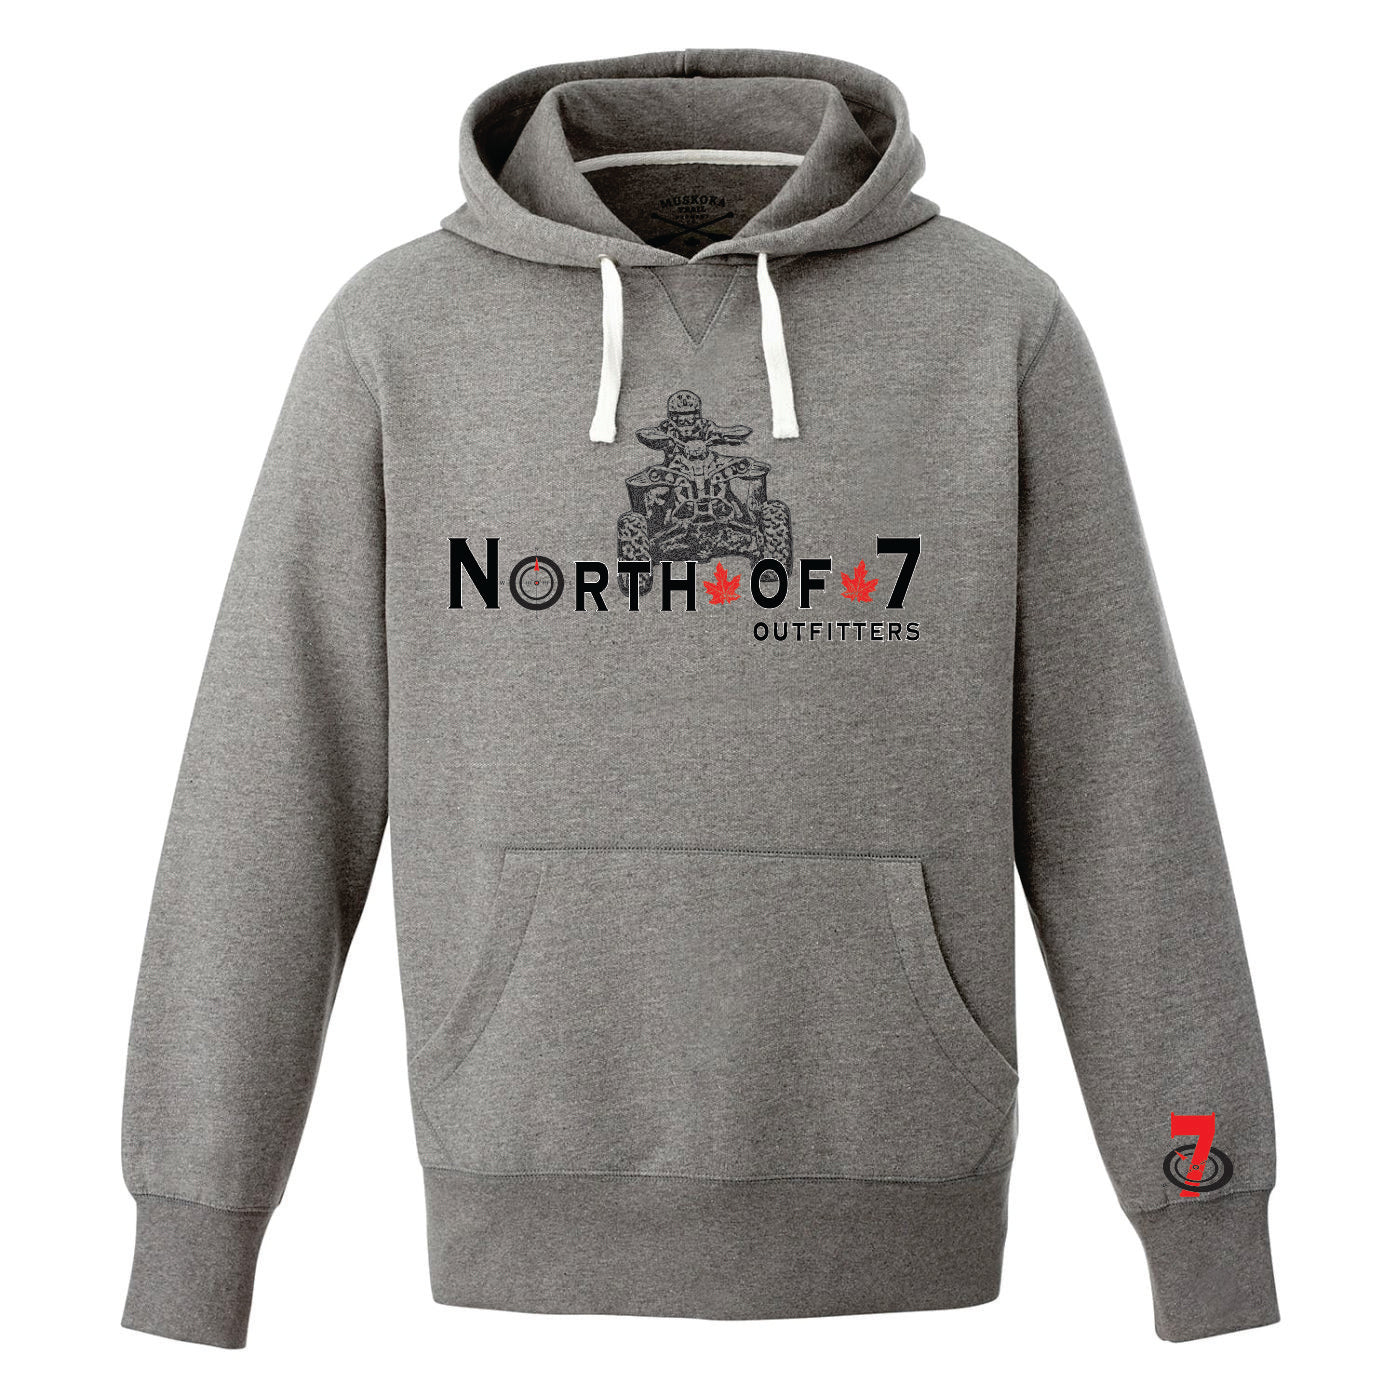 North of 7 Outfitters Men's Pullover Hoodie ATV